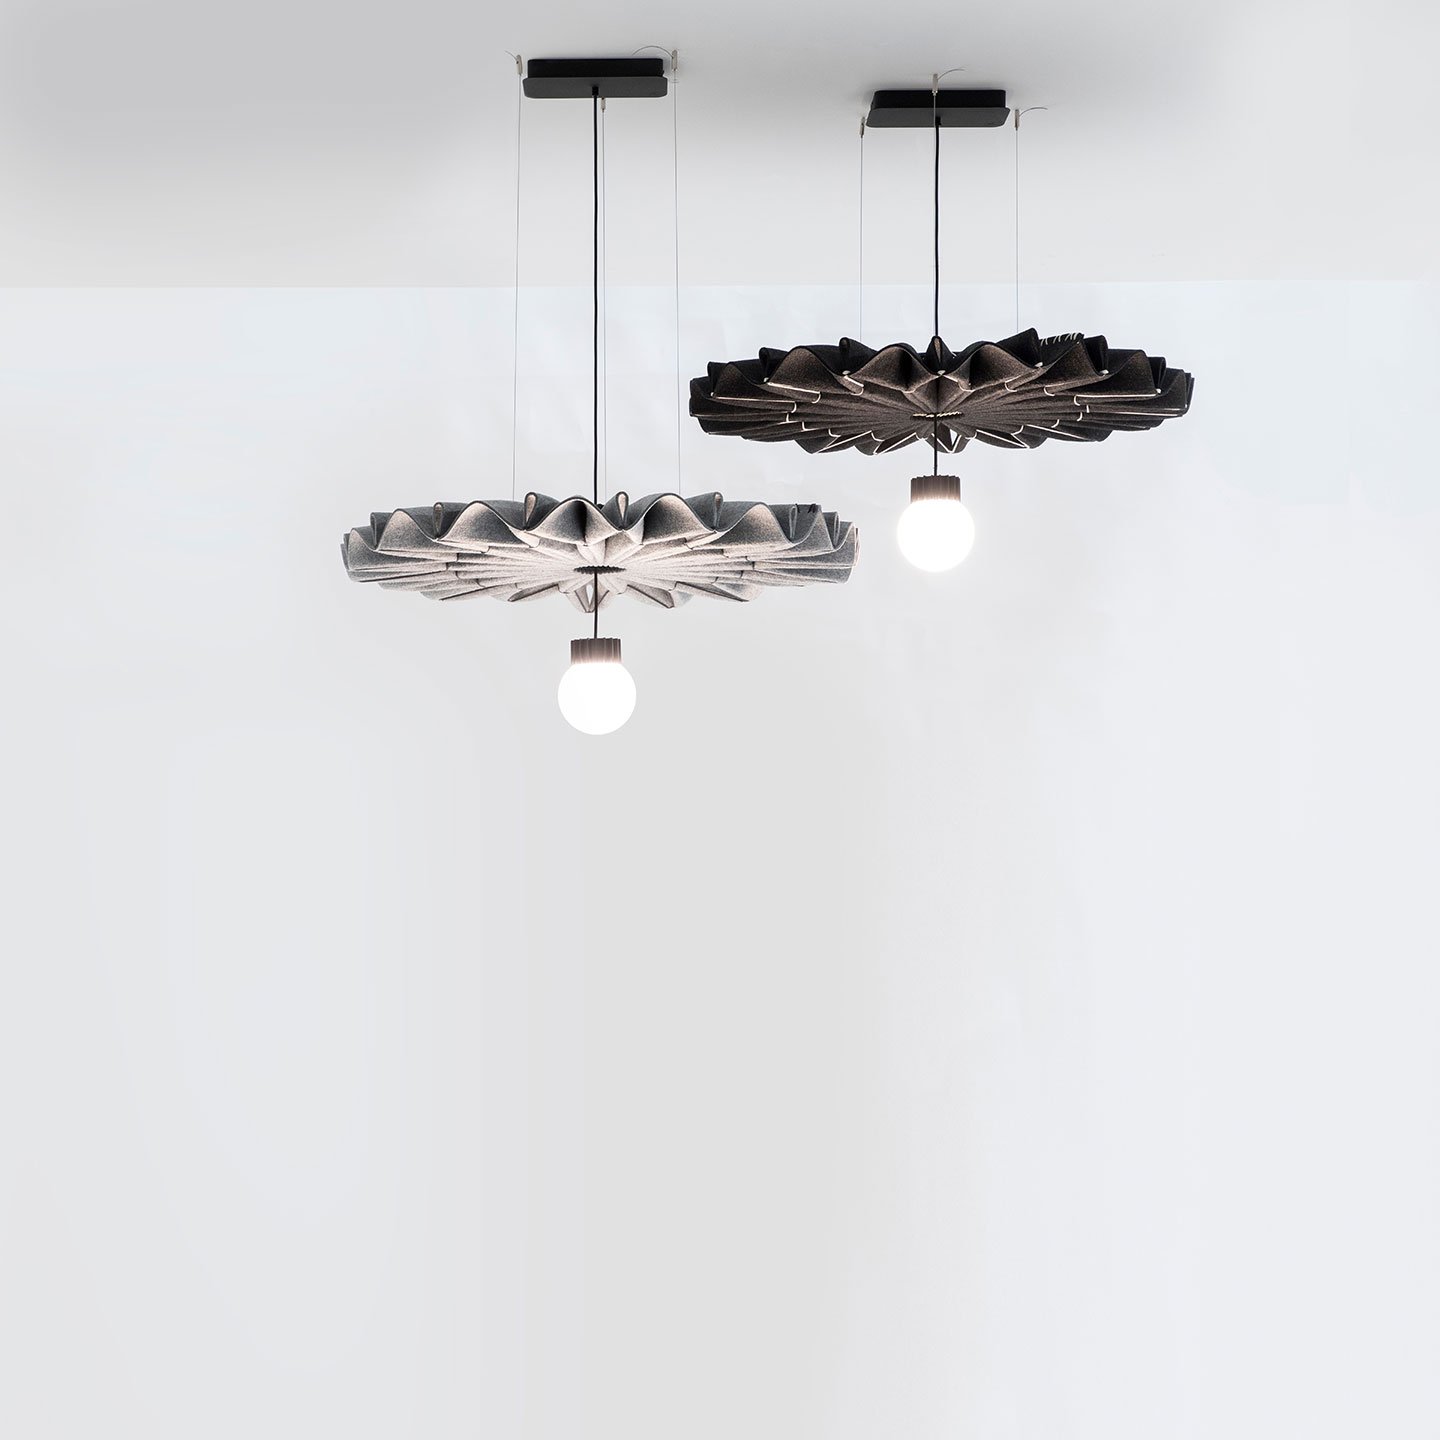 Haworth BuzziPleat LED Lighting in black and grey colors hanging from white ceiling